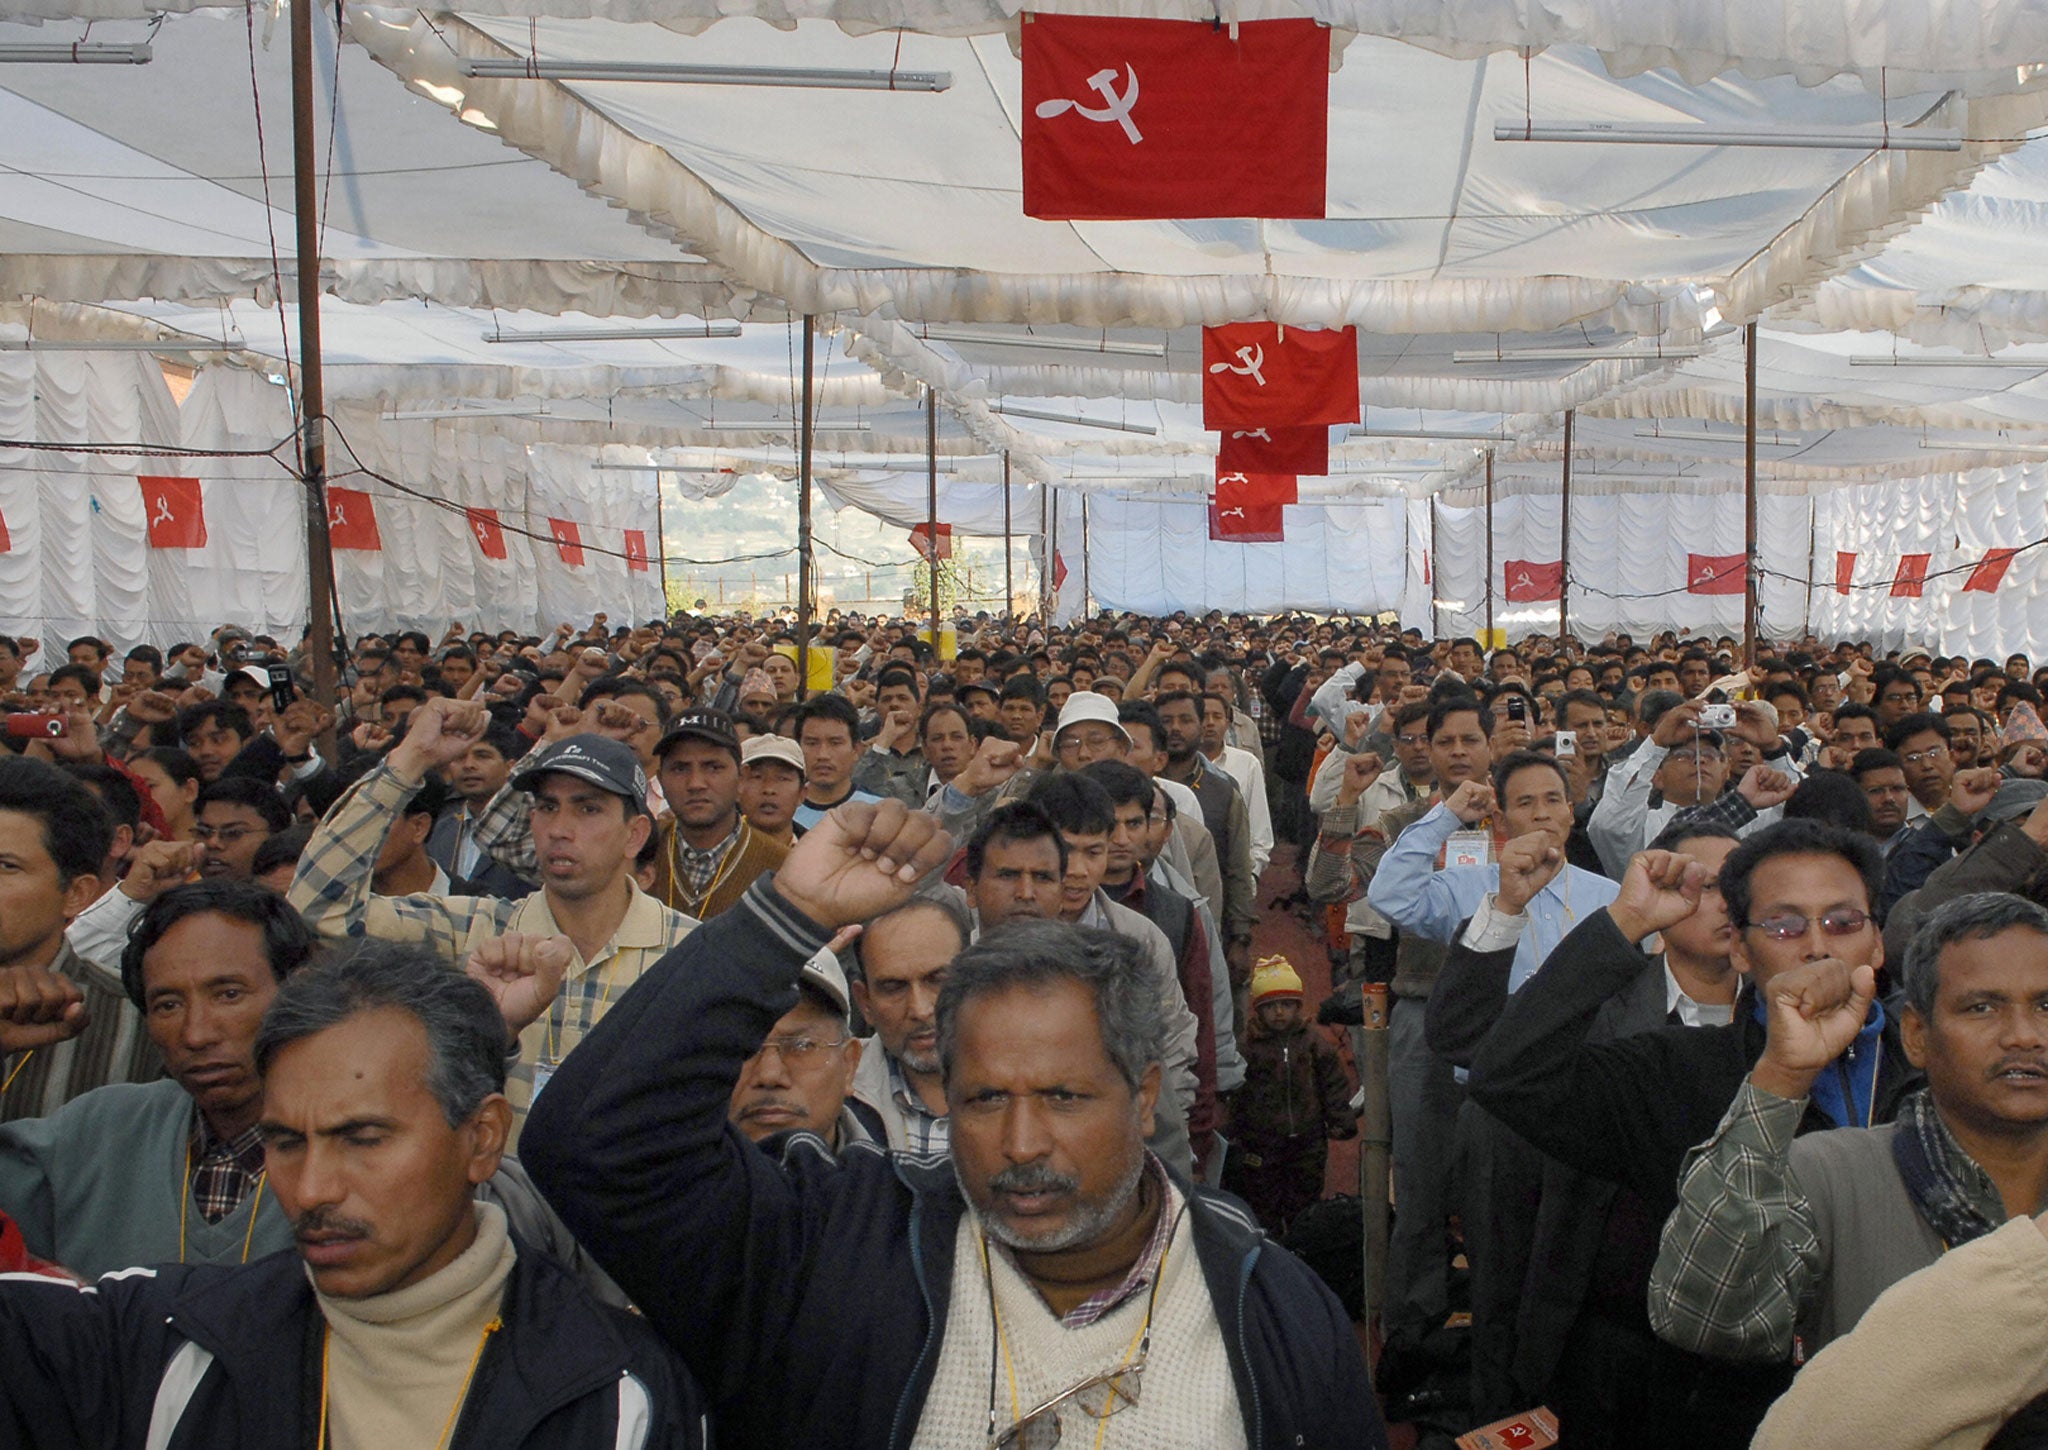 A synchronised salute from Cadres of the Maoist party in Nepal, which gained power in 2008